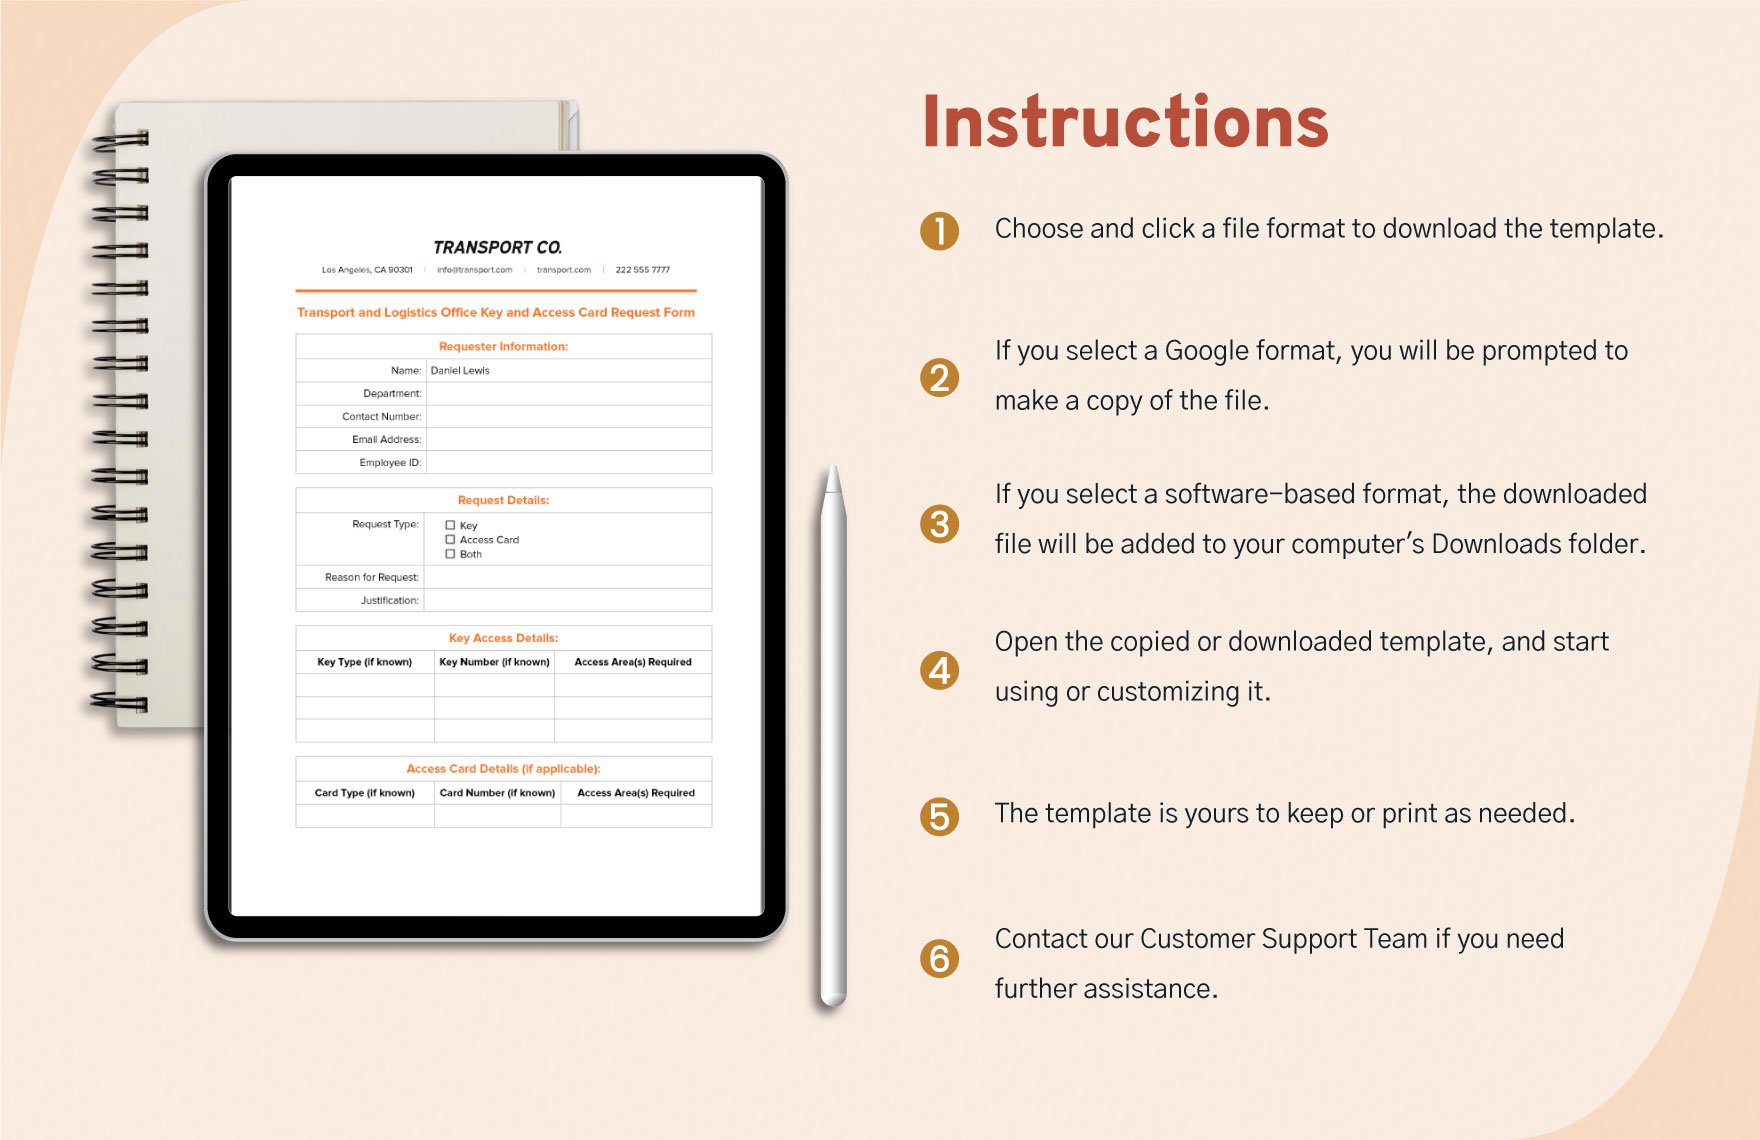 Transport and Logistics Office Key and Access Card Request Form Template